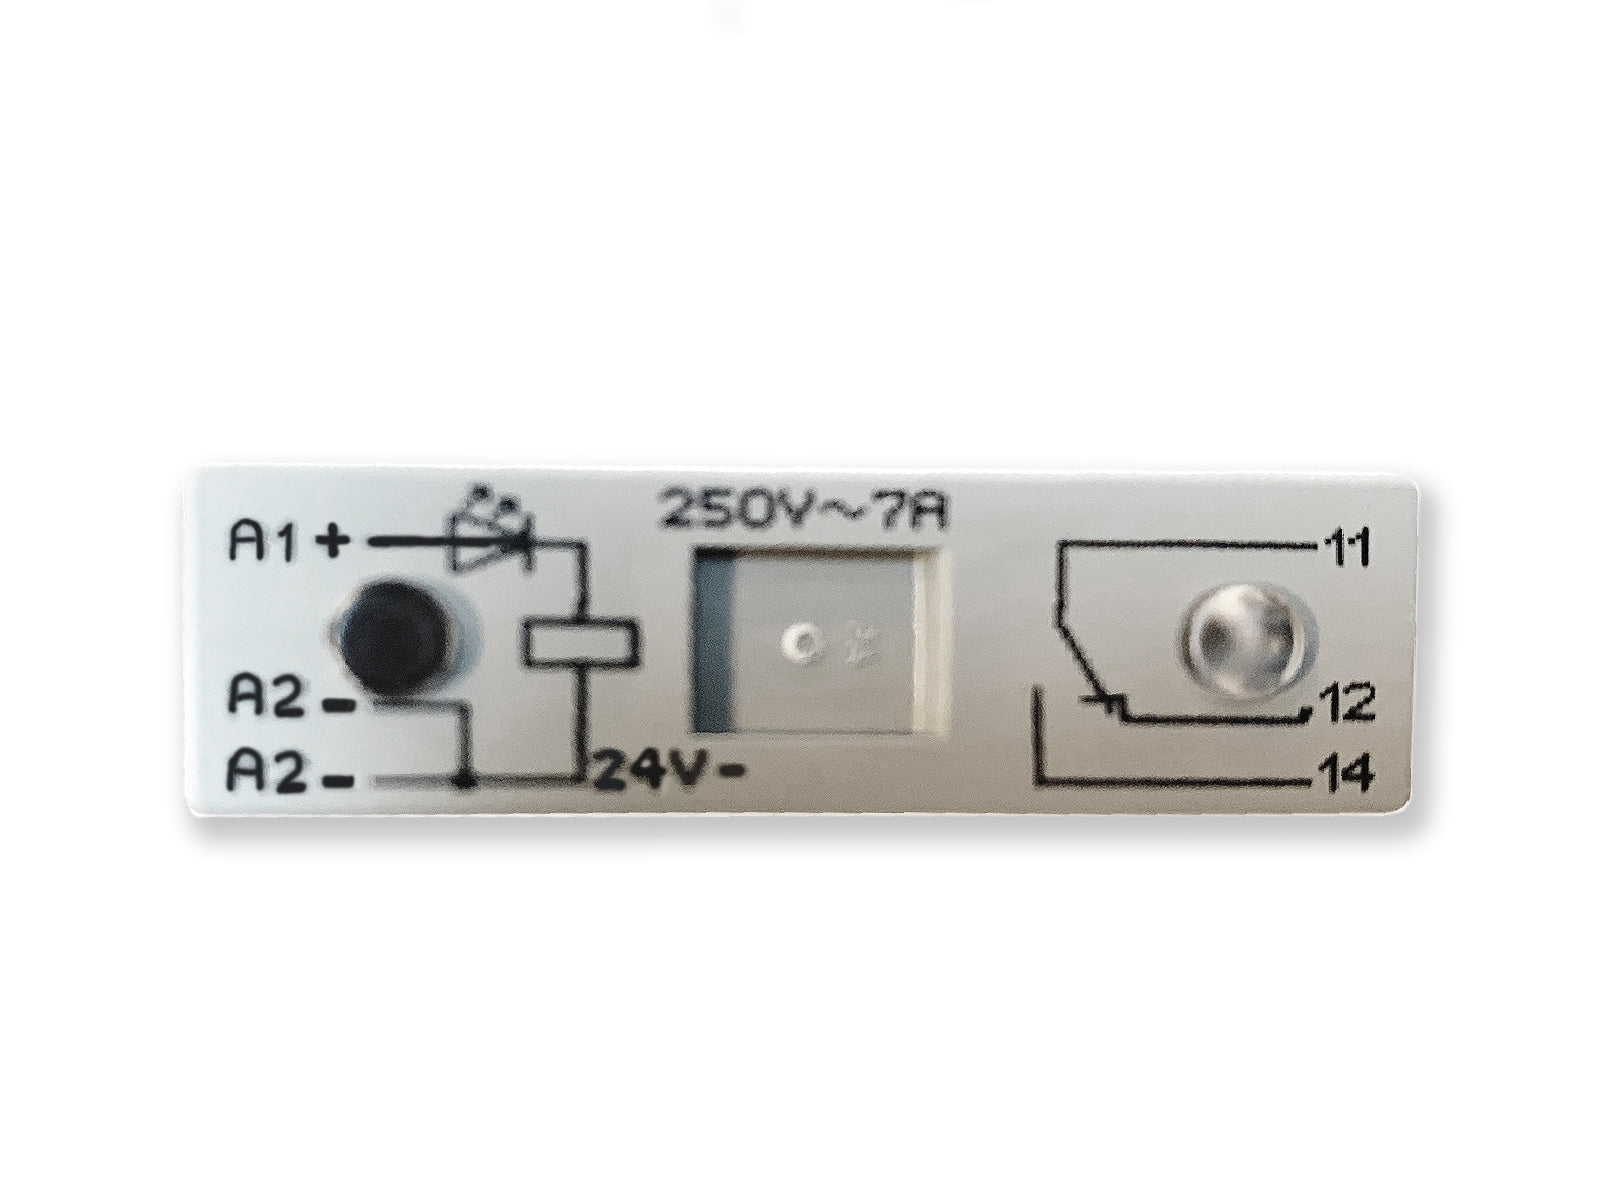 286-826 Wago and gate module with 6 inputs - ppdistributors